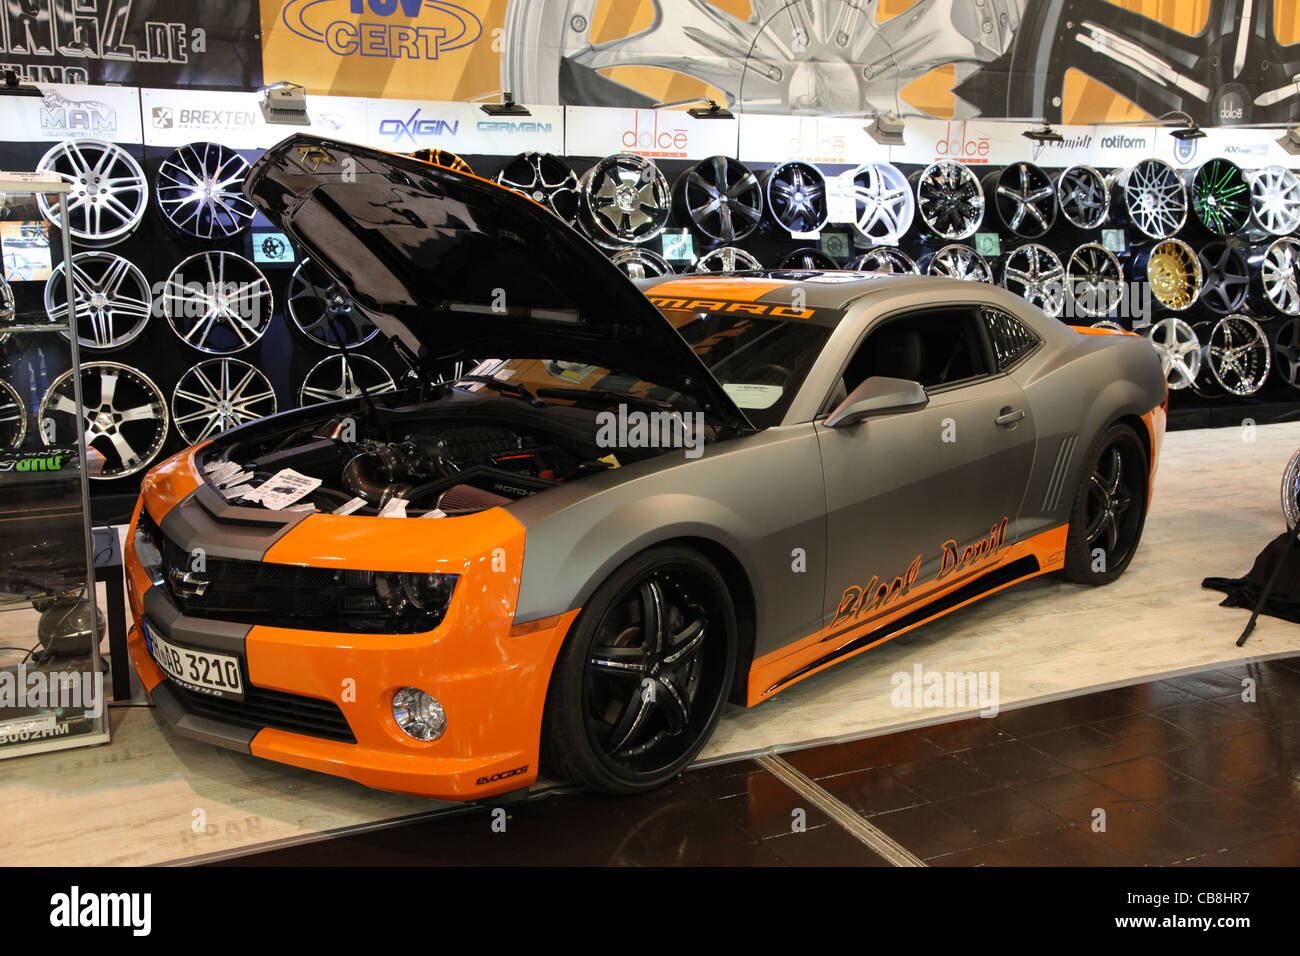 Chevrolet Camaro Muscle Car shown at the Essen Motor Show in Essen, Germany, on November 29, 2011 Stock Photo